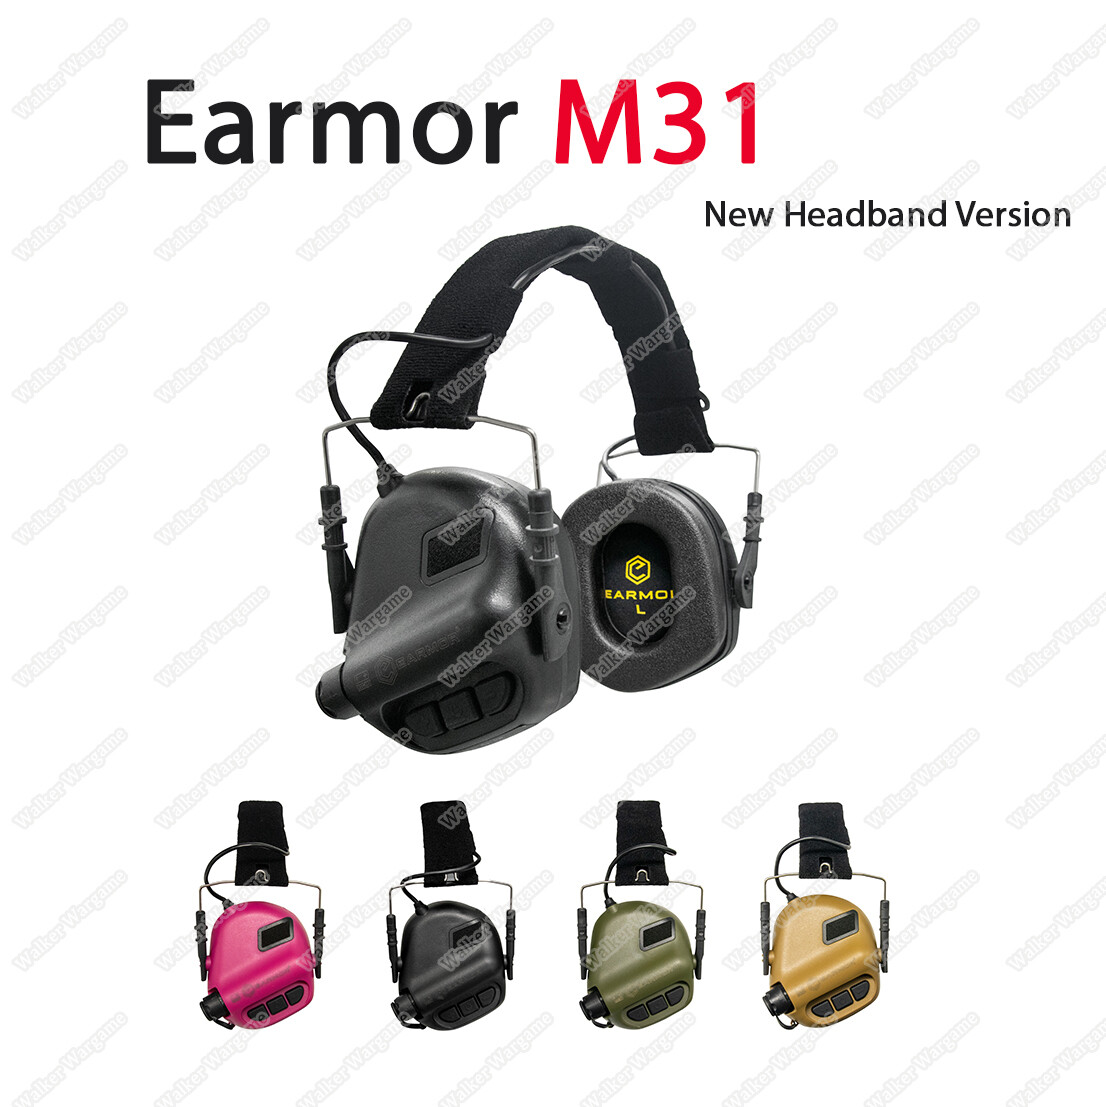 EARMOR M31 Noise Reducing Headset Electronic Hearing Protector